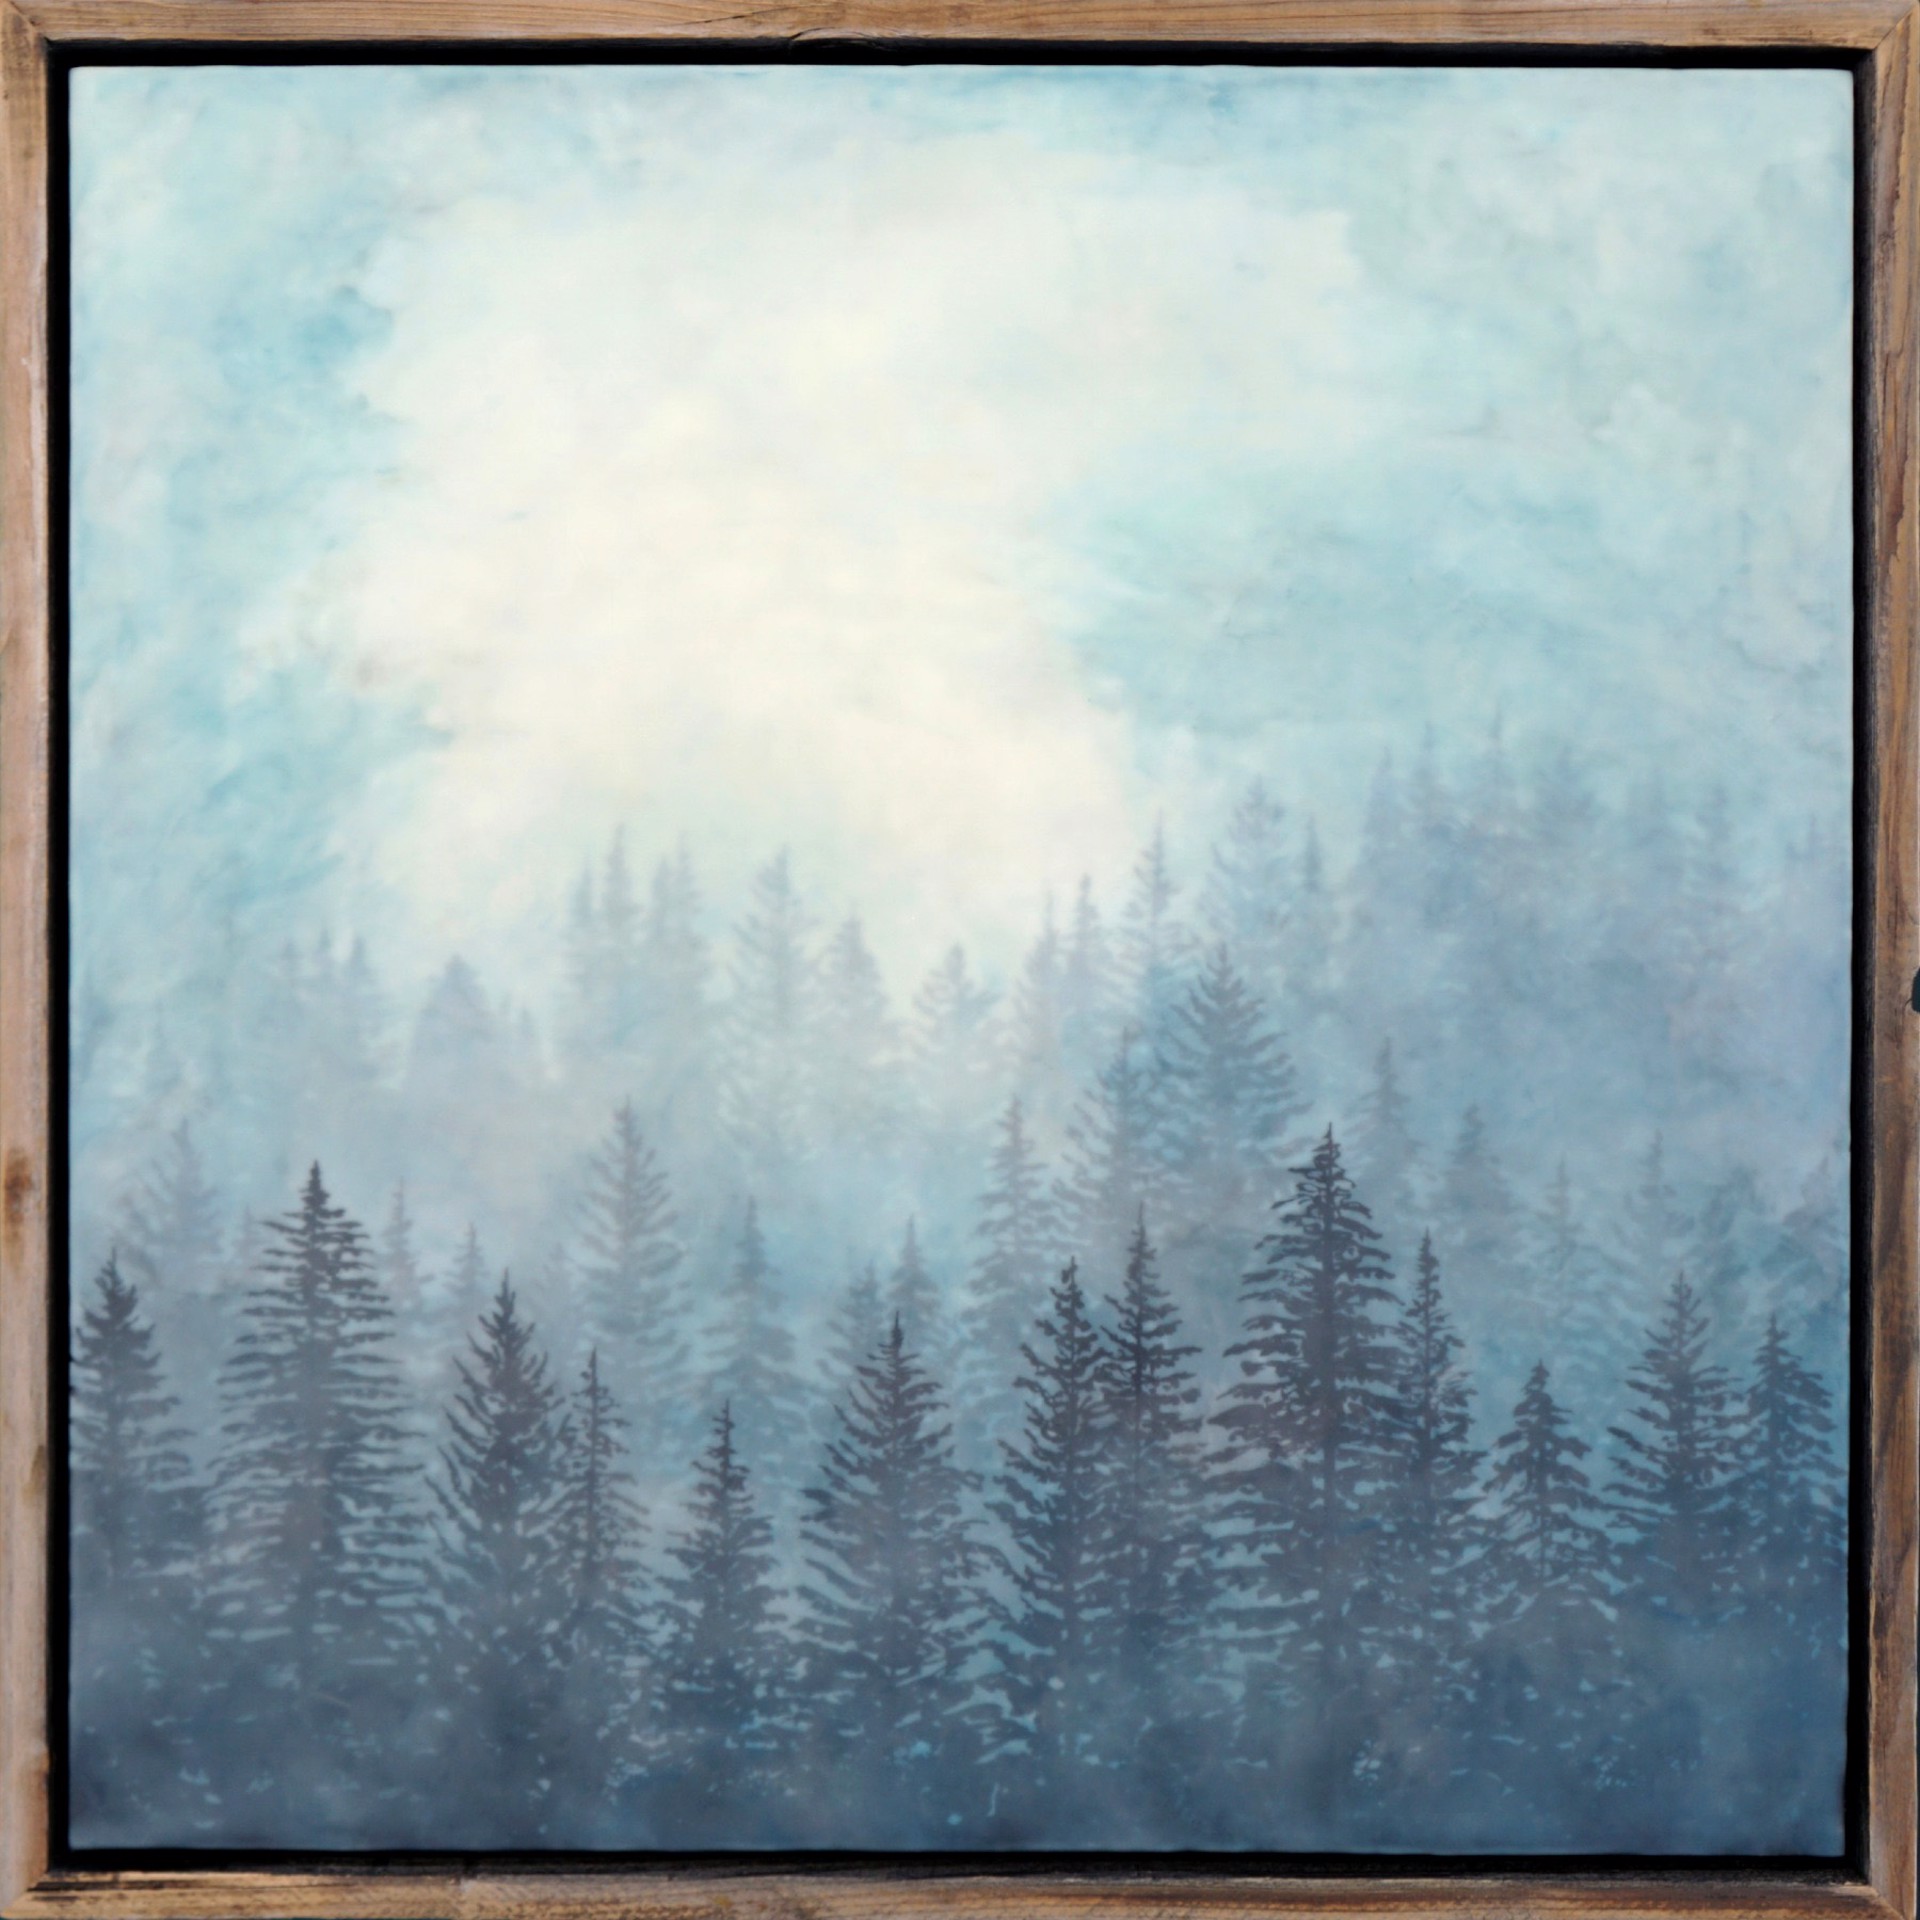 A Landscape Painting Made With Encaustic And Milk Paint Of Pine Trees And A Hazy Sky By Bridgette Meinhold